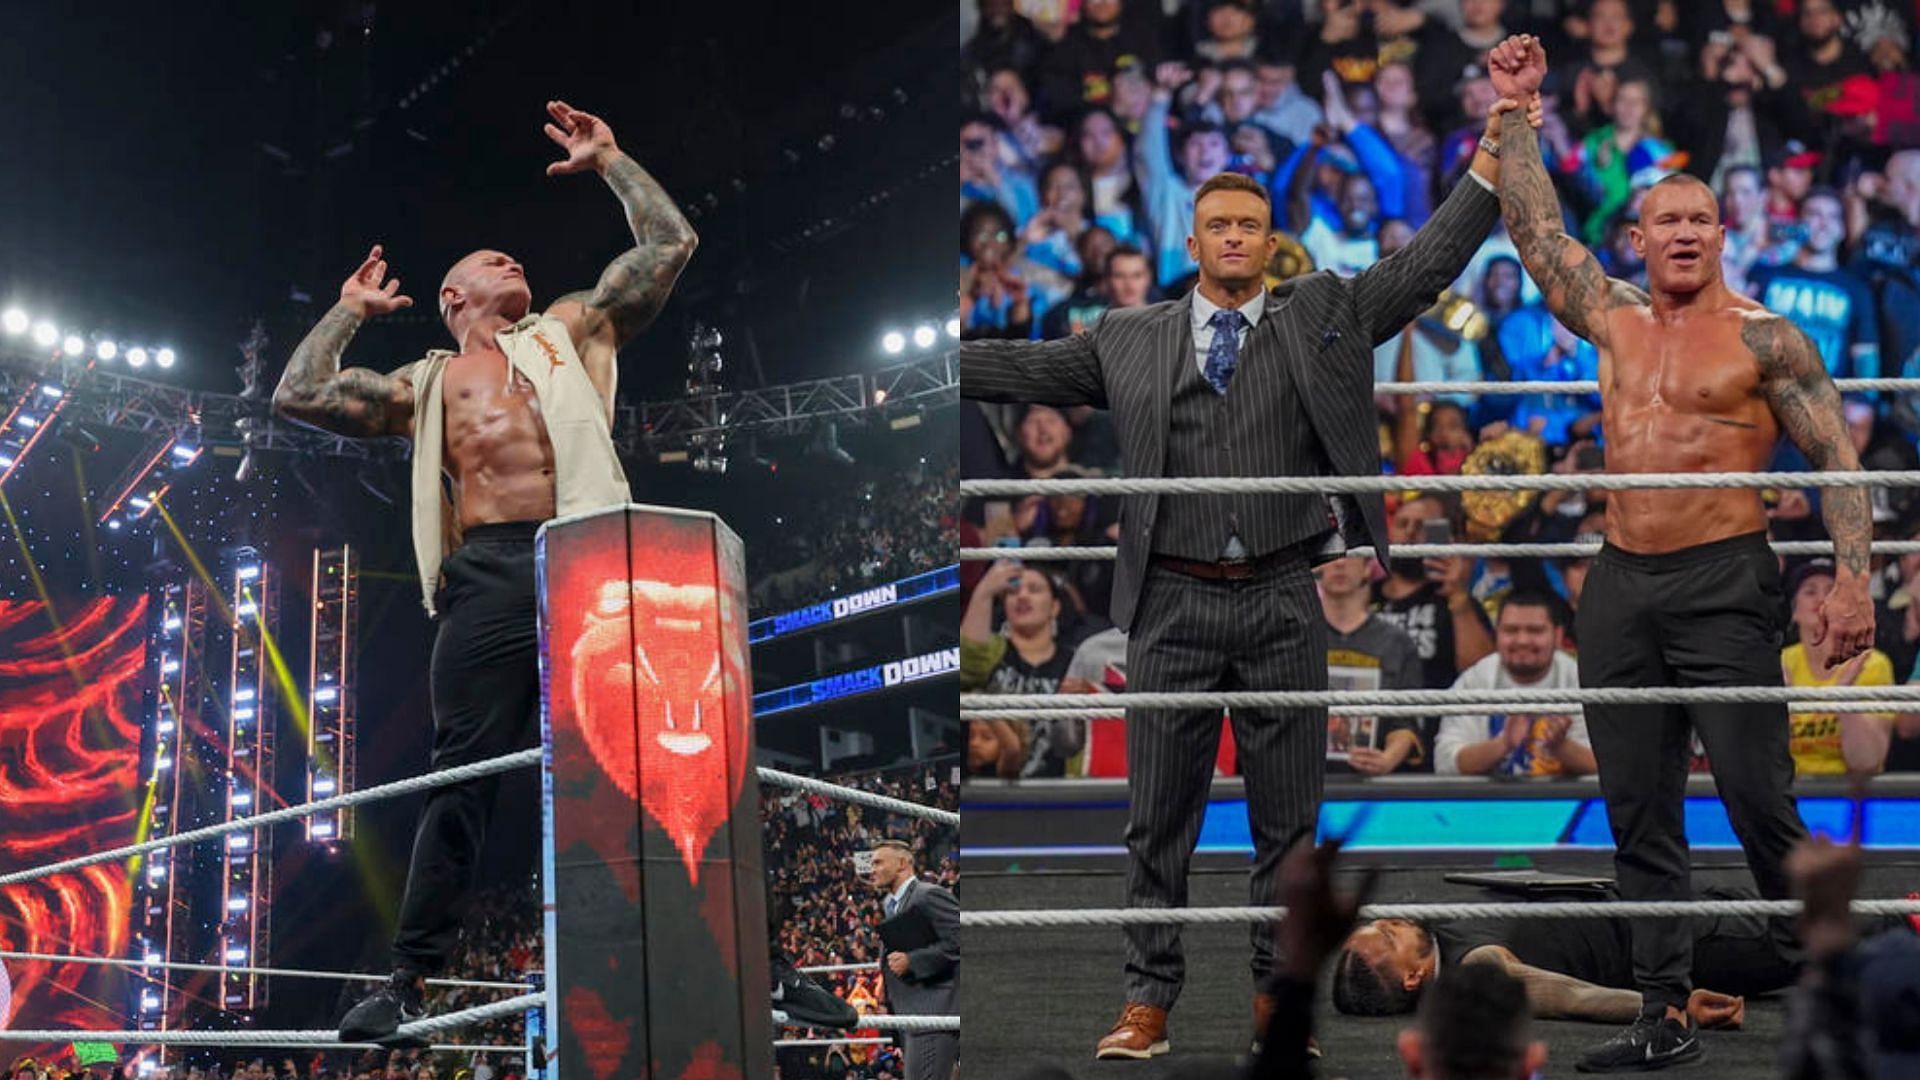 Randy Orton has signed with SmackDown